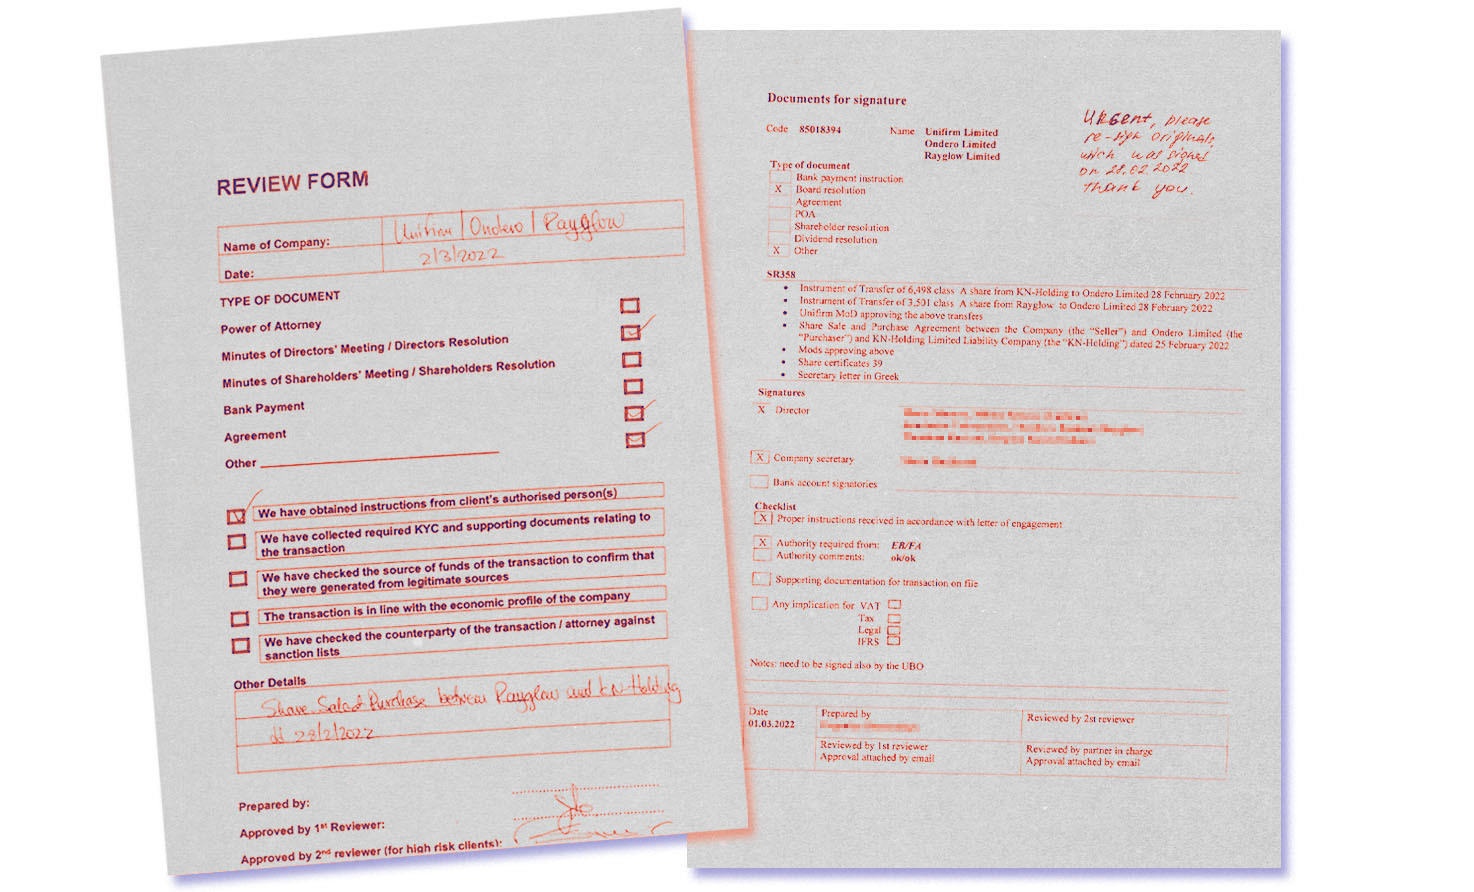 cyprus-confidential/pwc-documents-emails.jpg